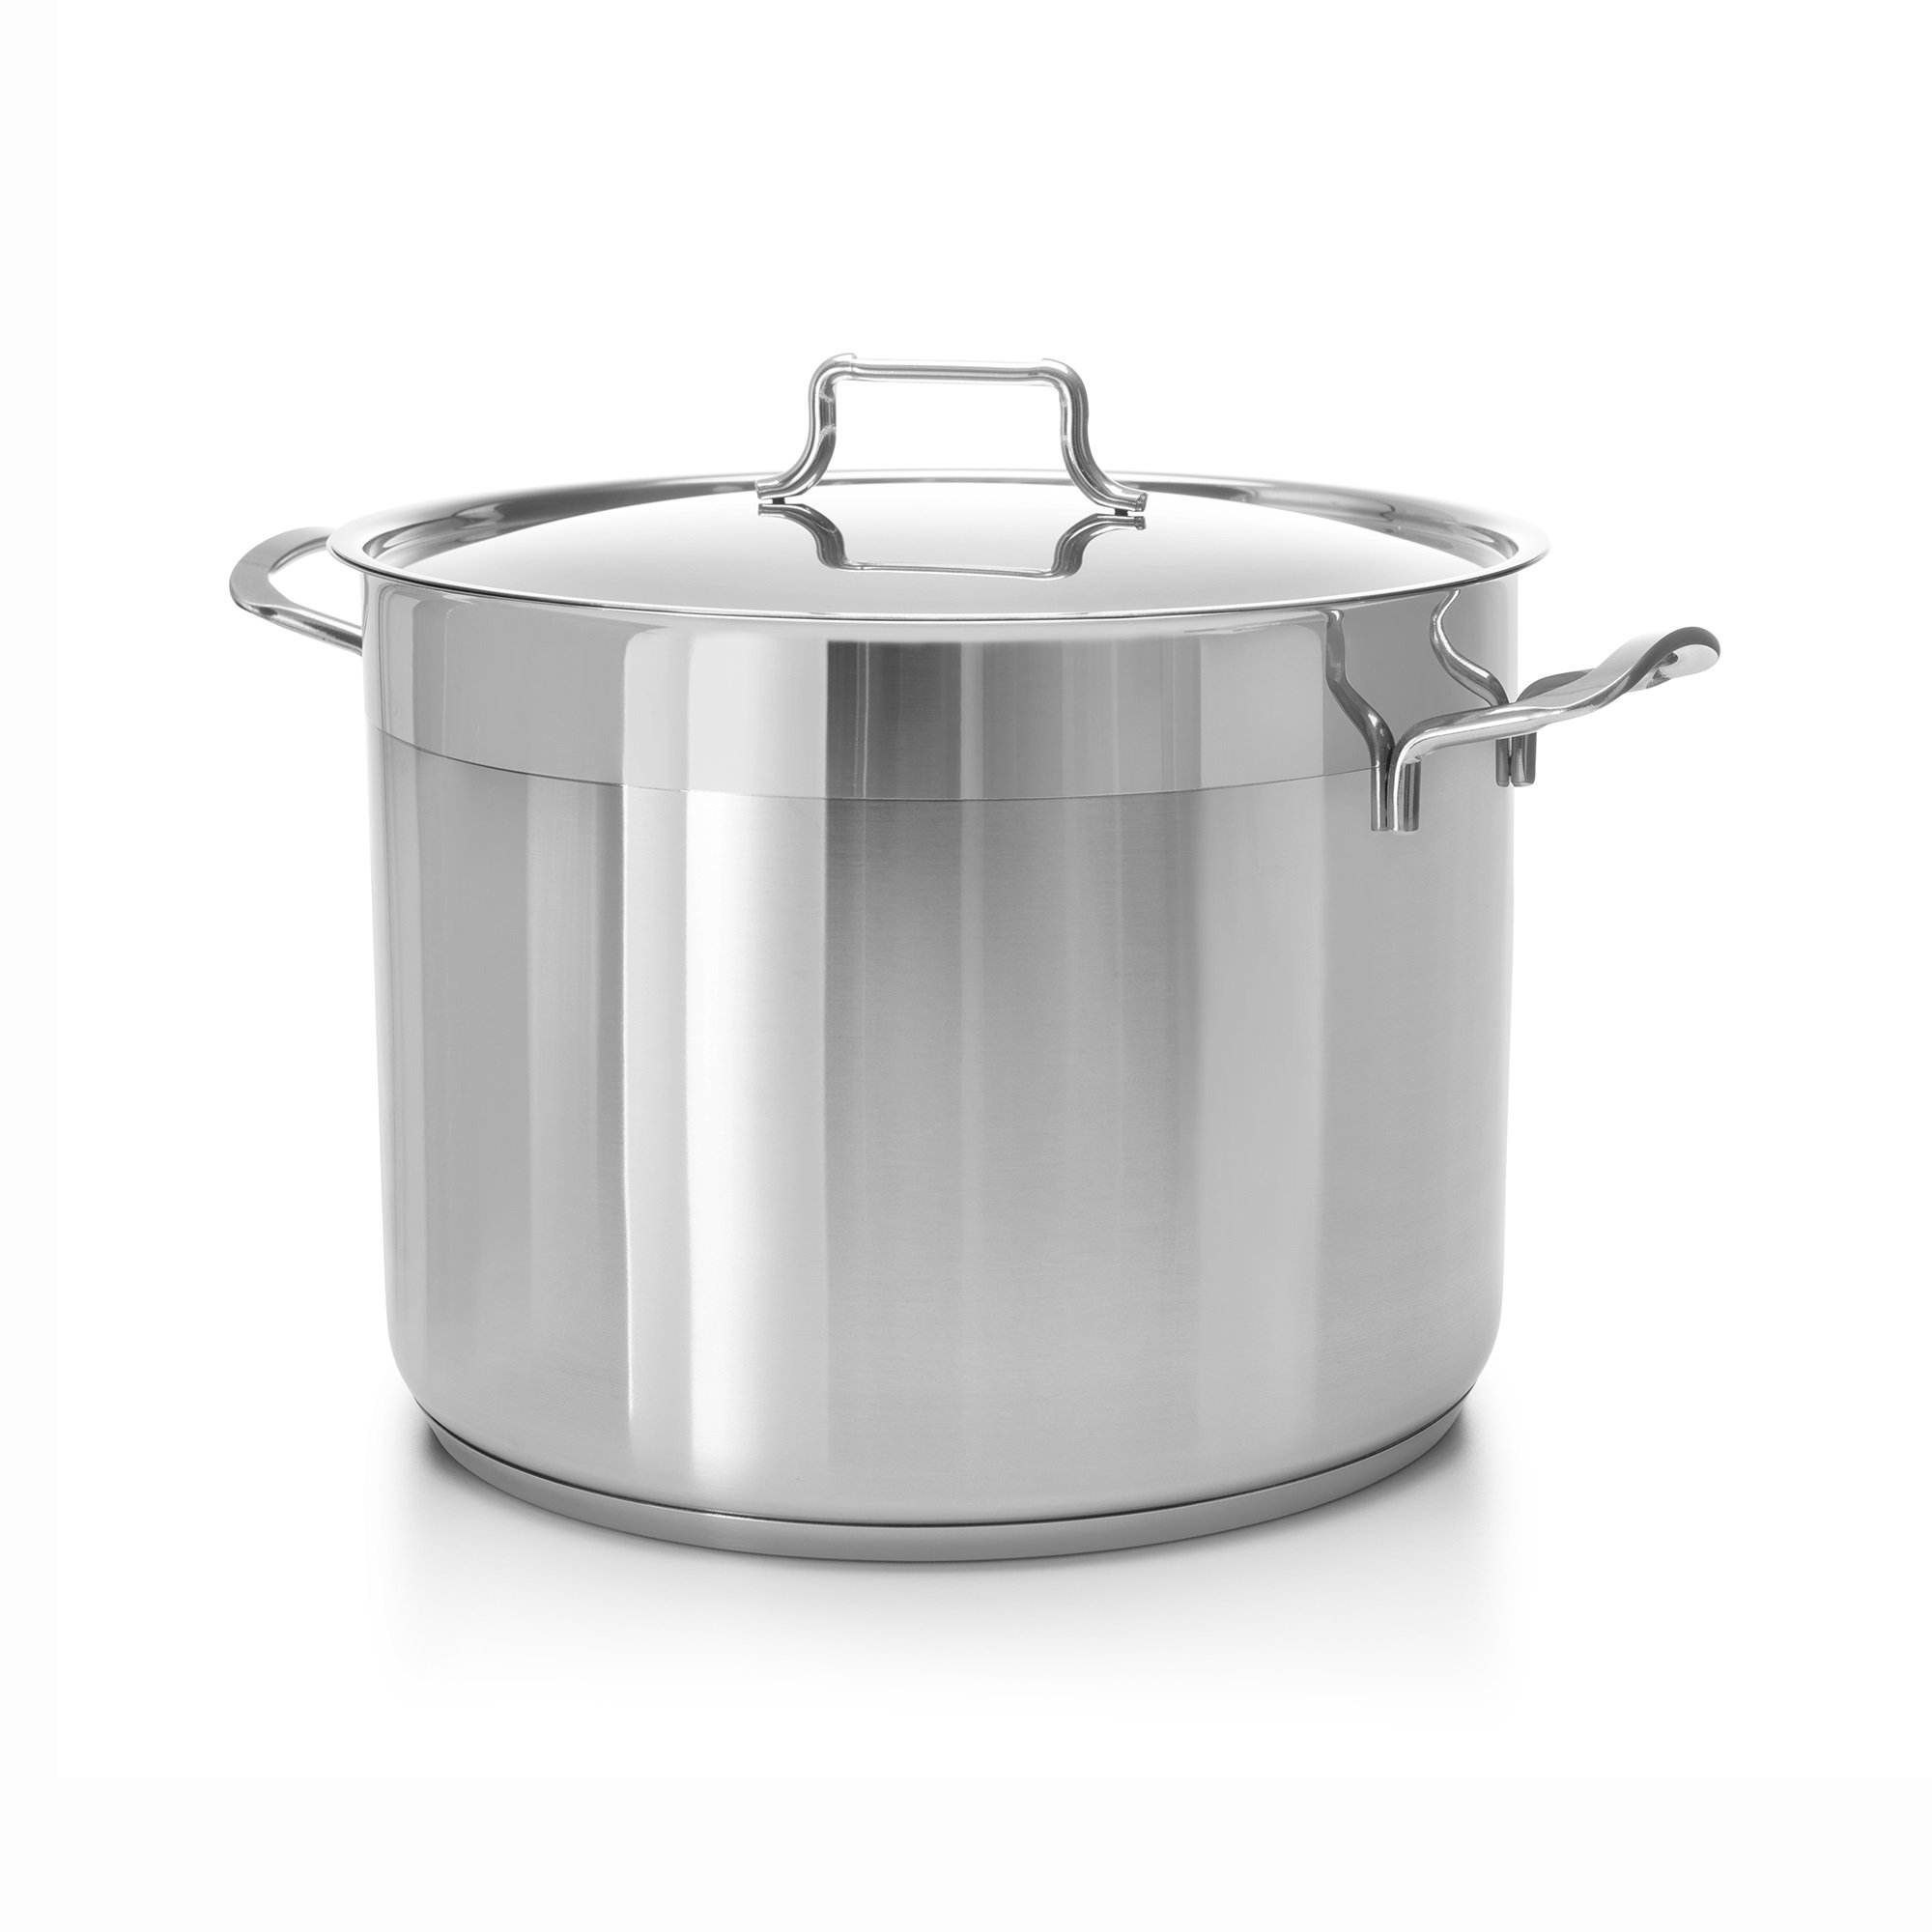 Hascevher Industry Leading Commercial-Grade Stainless Steel Stock Pot with Cover 11 Quart, Induction Compatible